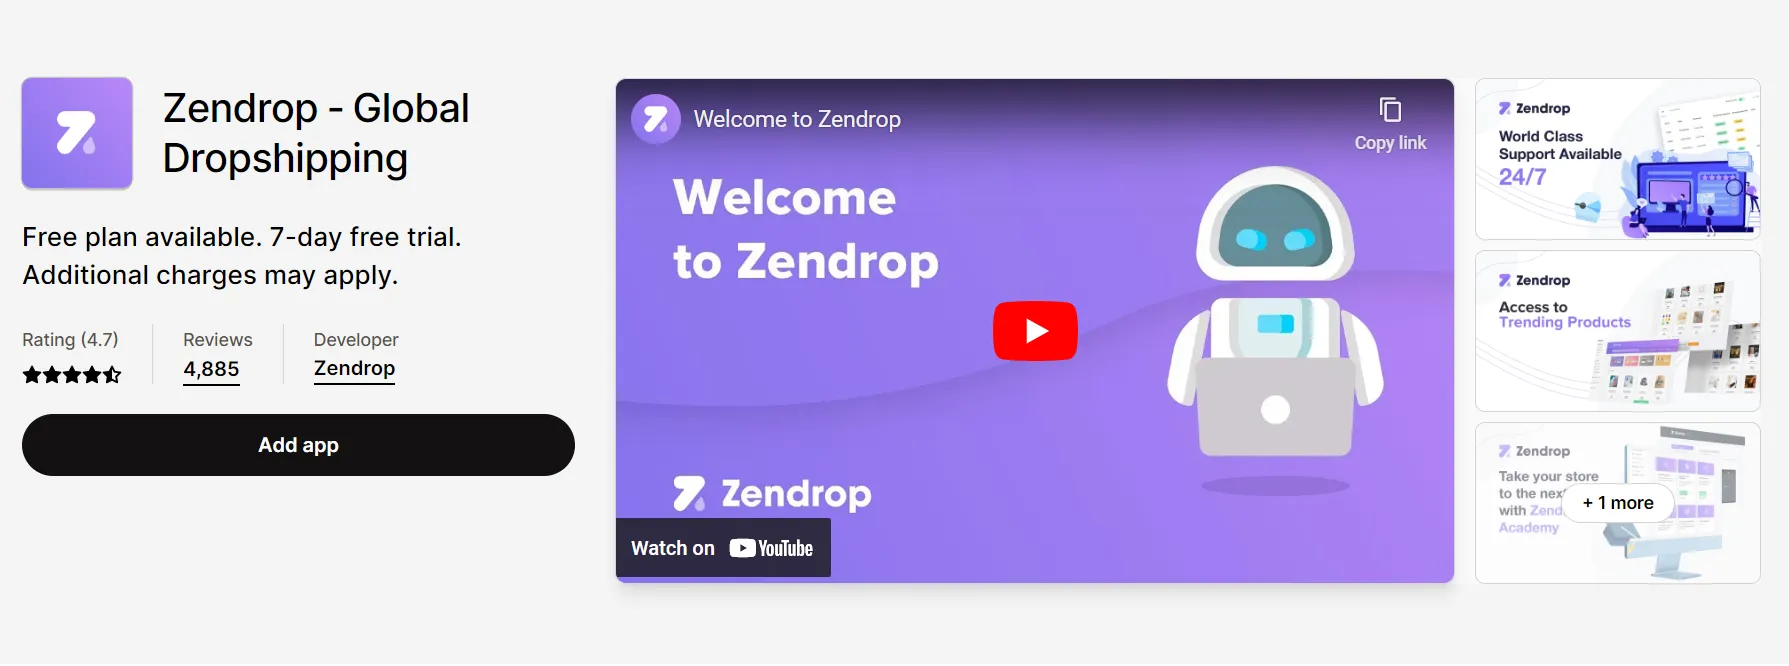 Zendrop best Shopify app for dropshipping